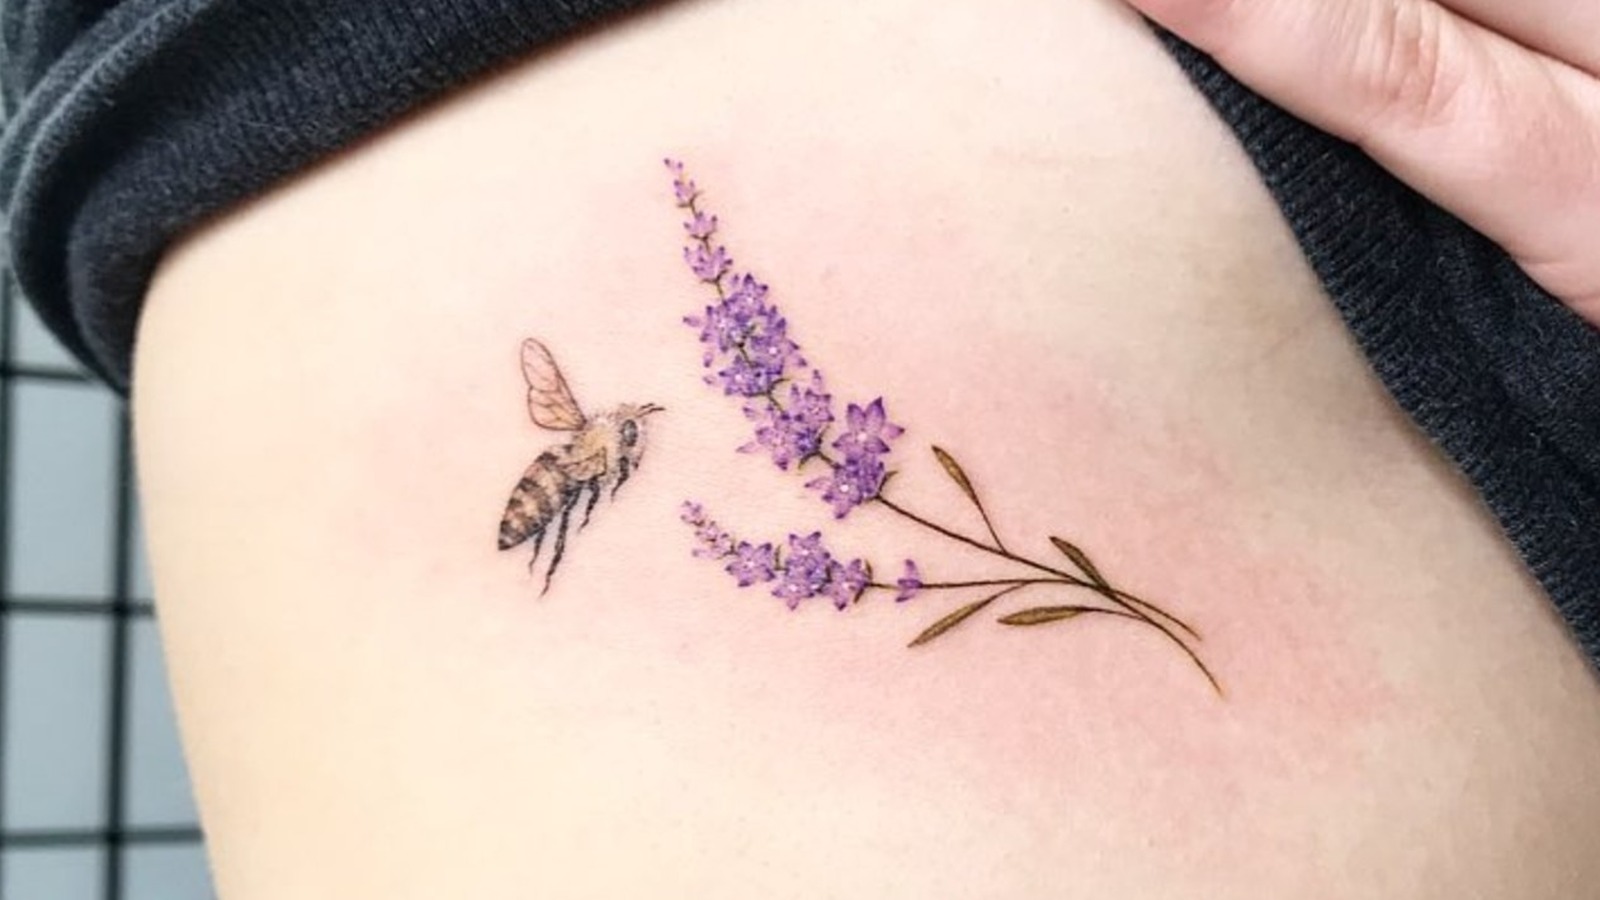 Lavender tattoo meaning